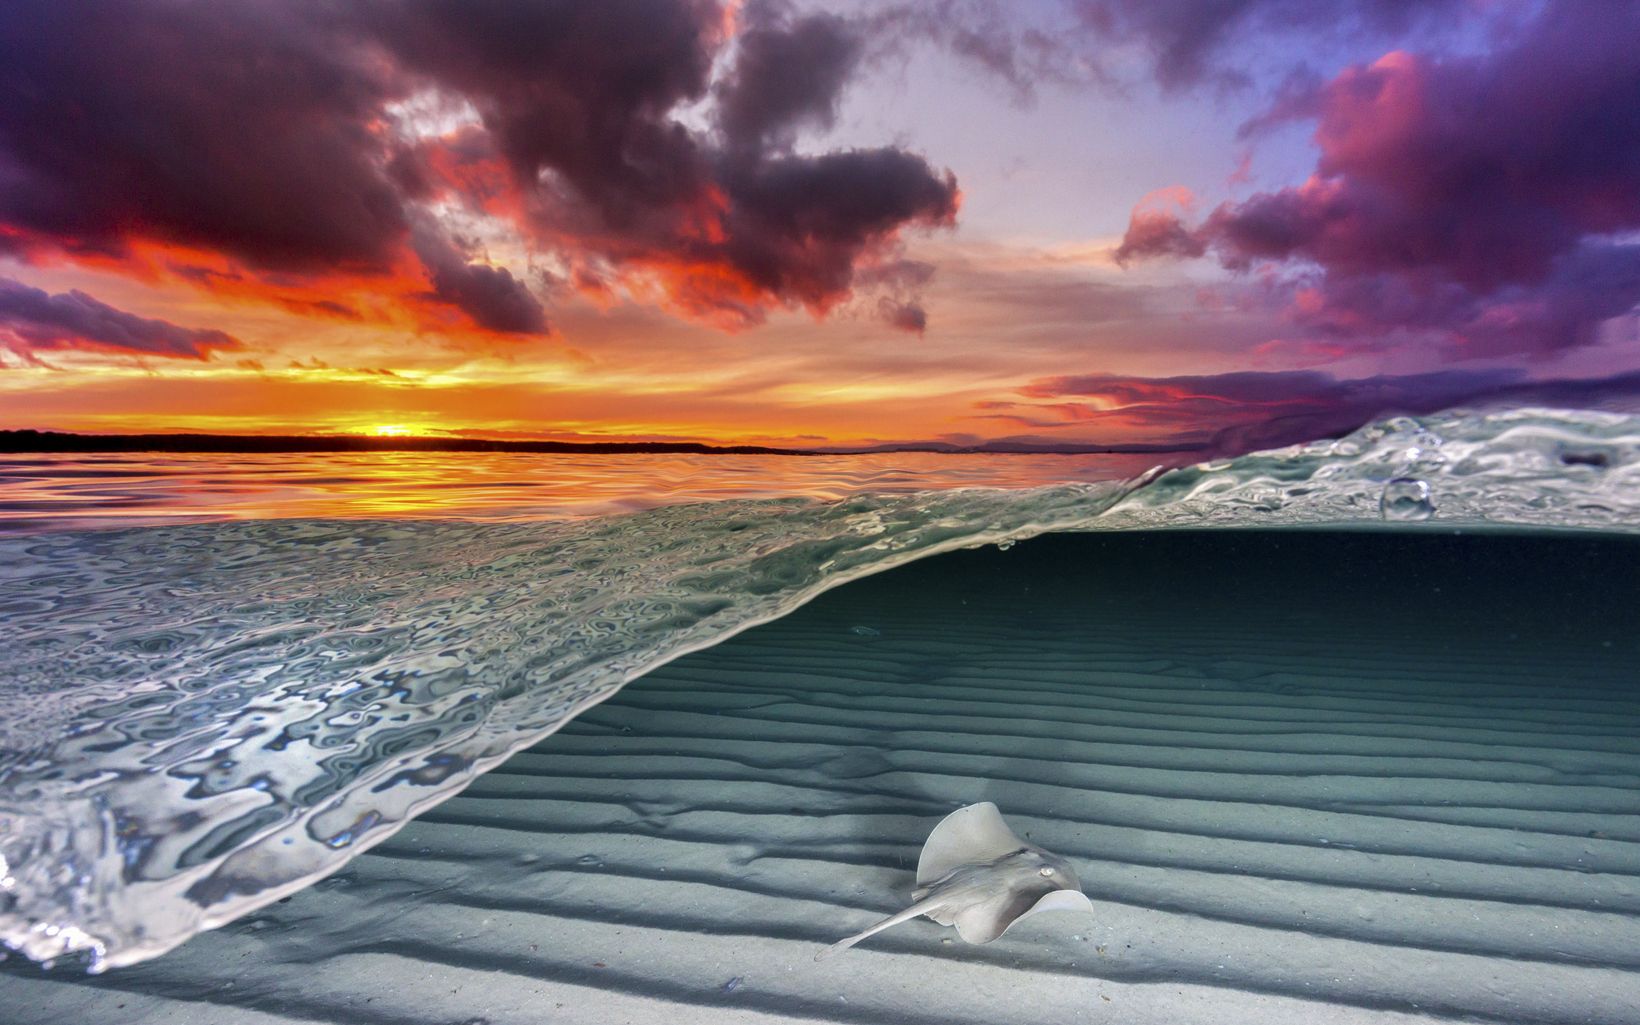 Calm above & below. An over-under photo of a common stingray gliding over the shallow sand flats as the sky bursts to life with color from the setting sun. © Jordan Robins